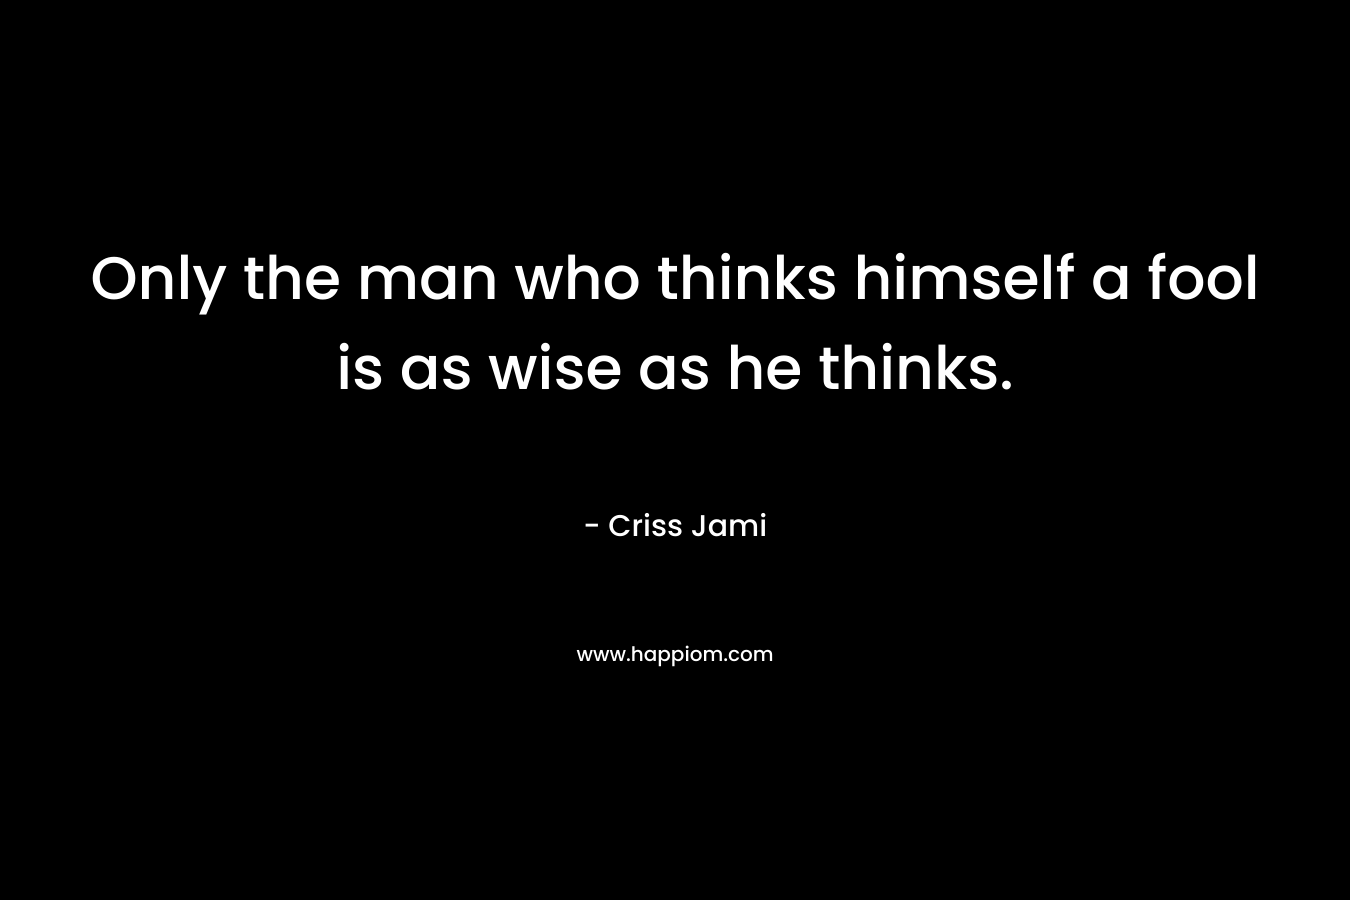 Only the man who thinks himself a fool is as wise as he thinks.